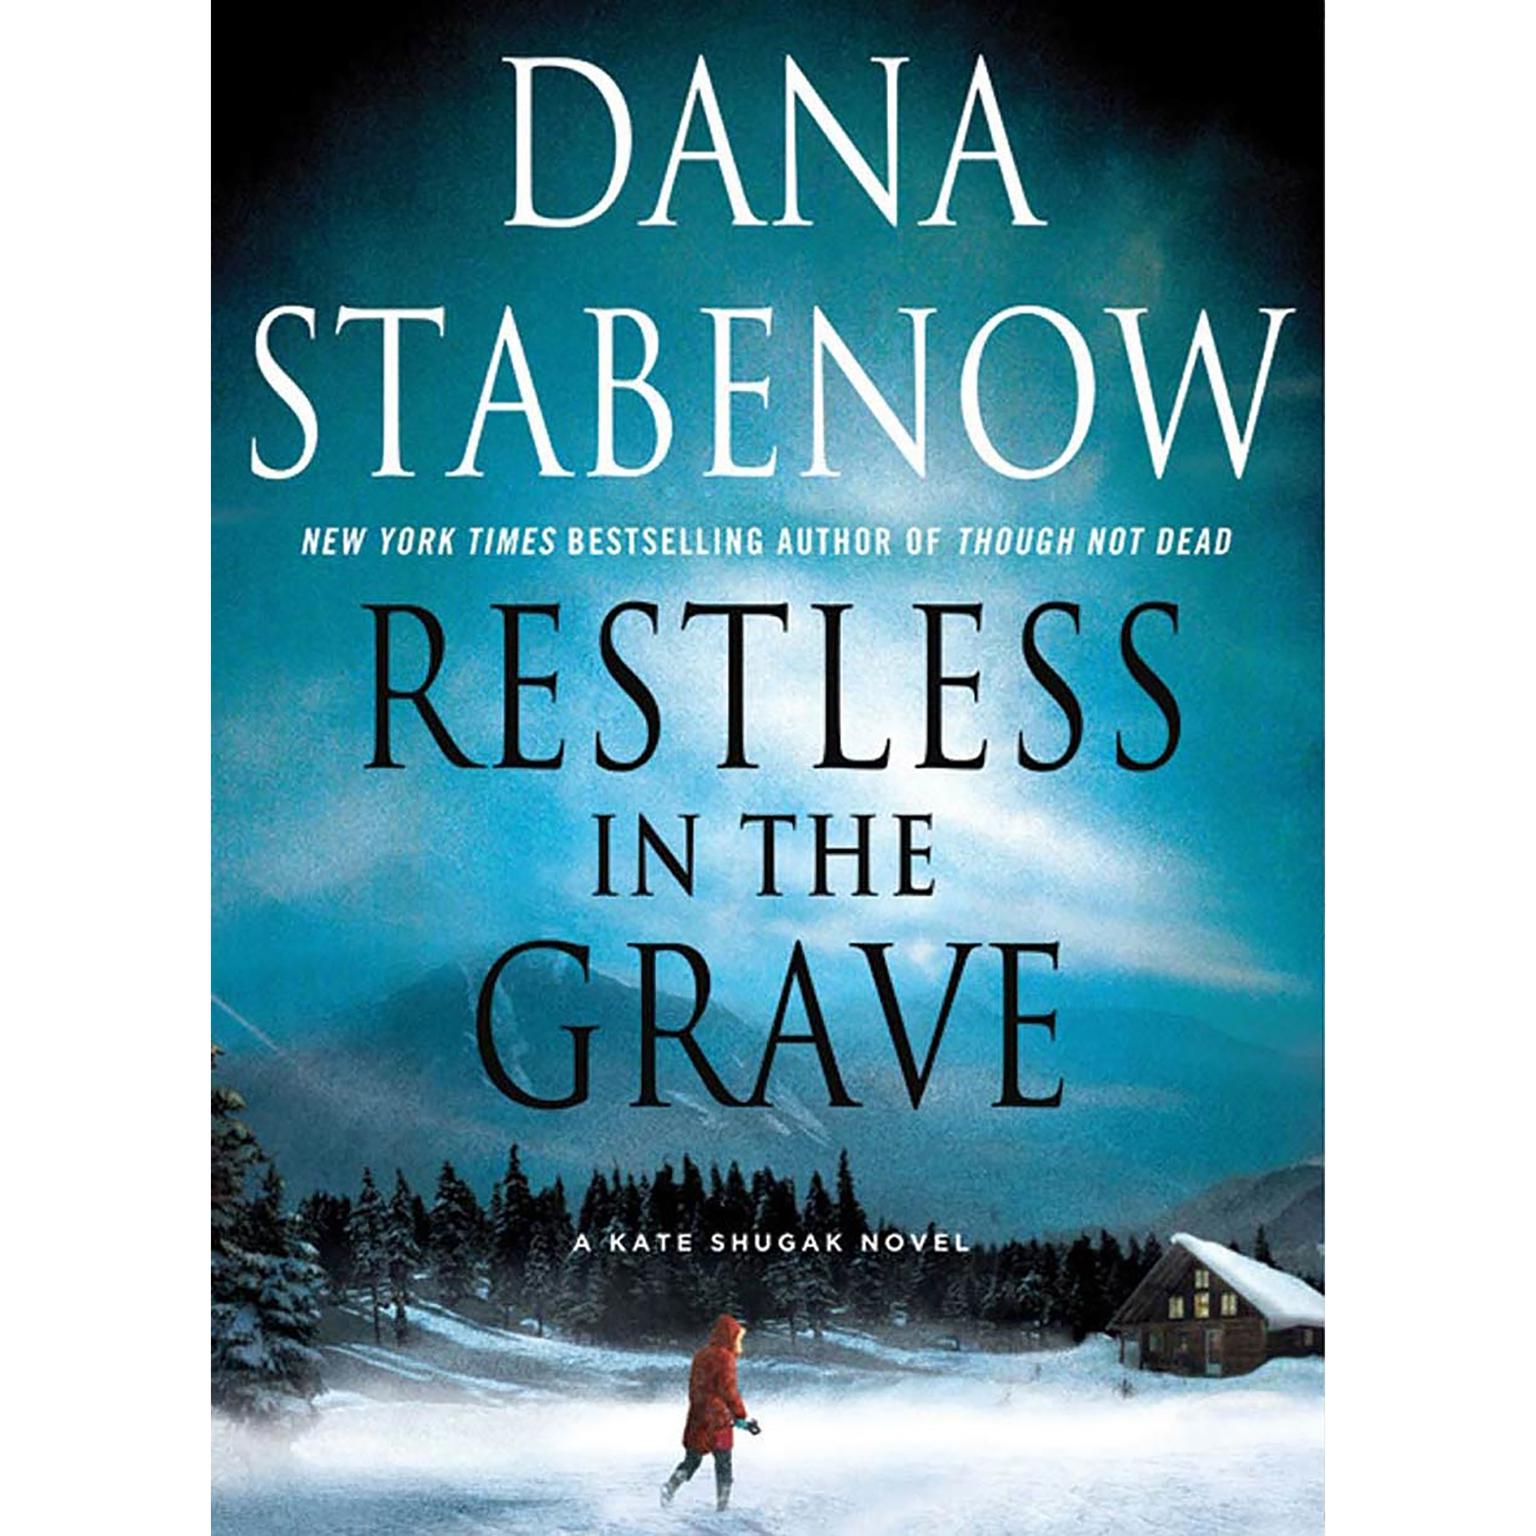 Restless in the Grave: A Kate Shugak Novel Audiobook, by Dana Stabenow